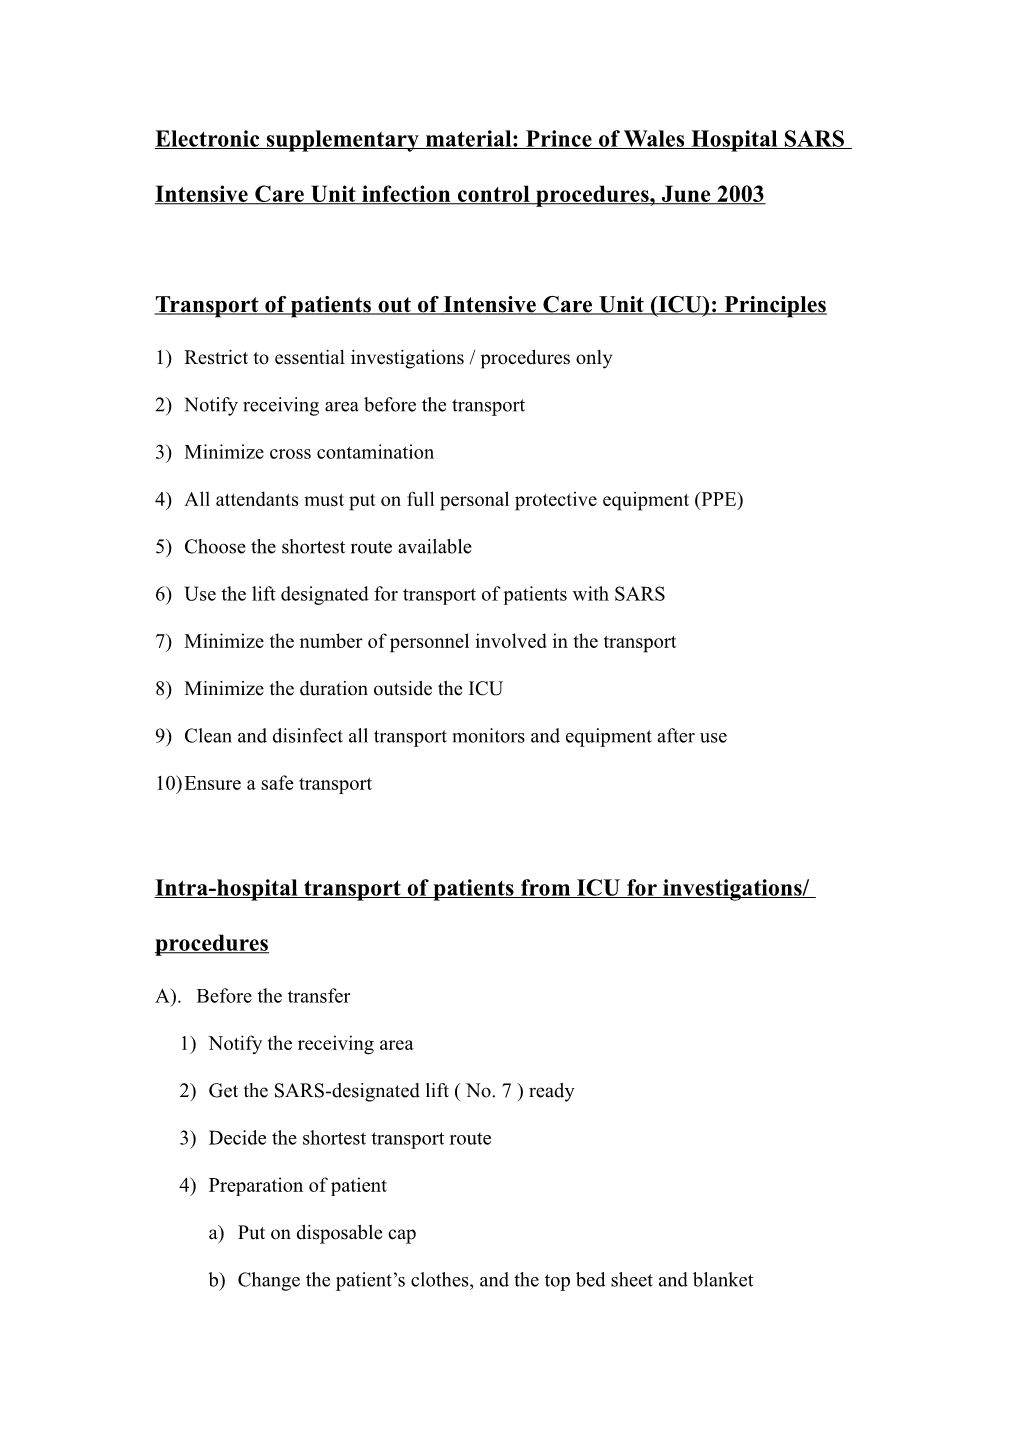 Transport of Patients out of Intensive Care Unit (ICU): Principles